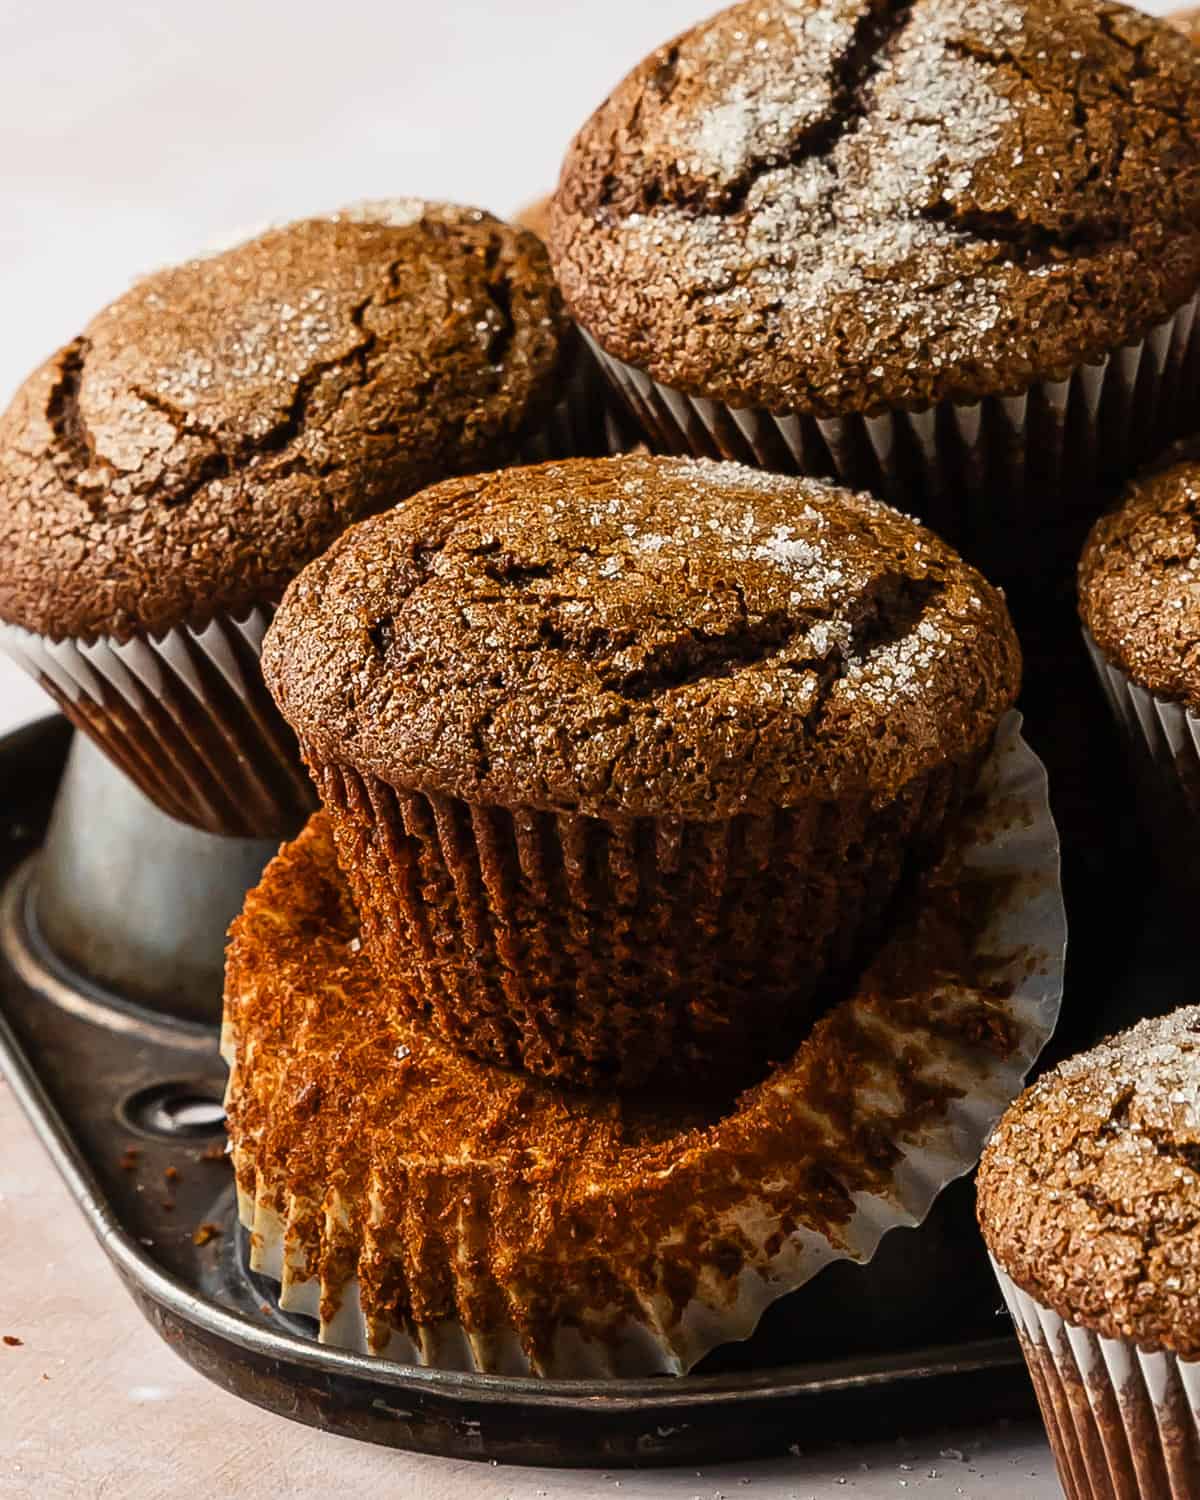 Gingerbread muffins are soft and fluffy, bakery style molasses muffins. They are filled with lots of cozy warming spices and are topped with crunchy sugar. These ginger muffins are easy to make and will be your favorite winter muffin recipe. 